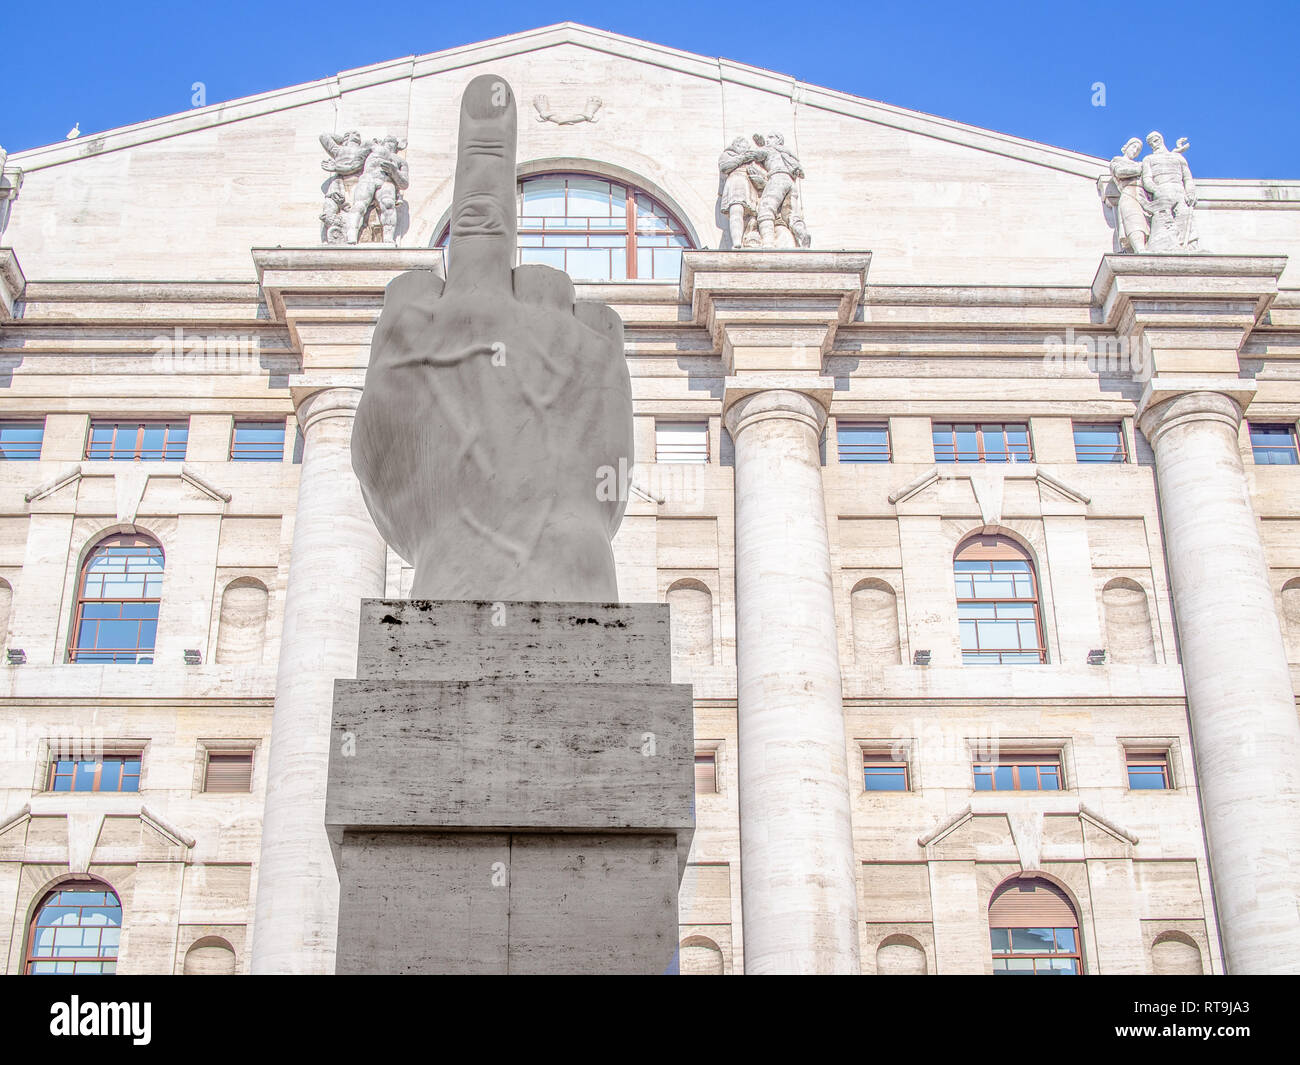 MILAN, ITALY-FEBRUARY 15, 2019: Monument to the Middle finger or L.O.V.E. by Maurizio Cattelanat Piazza degli Affari Stock Photo